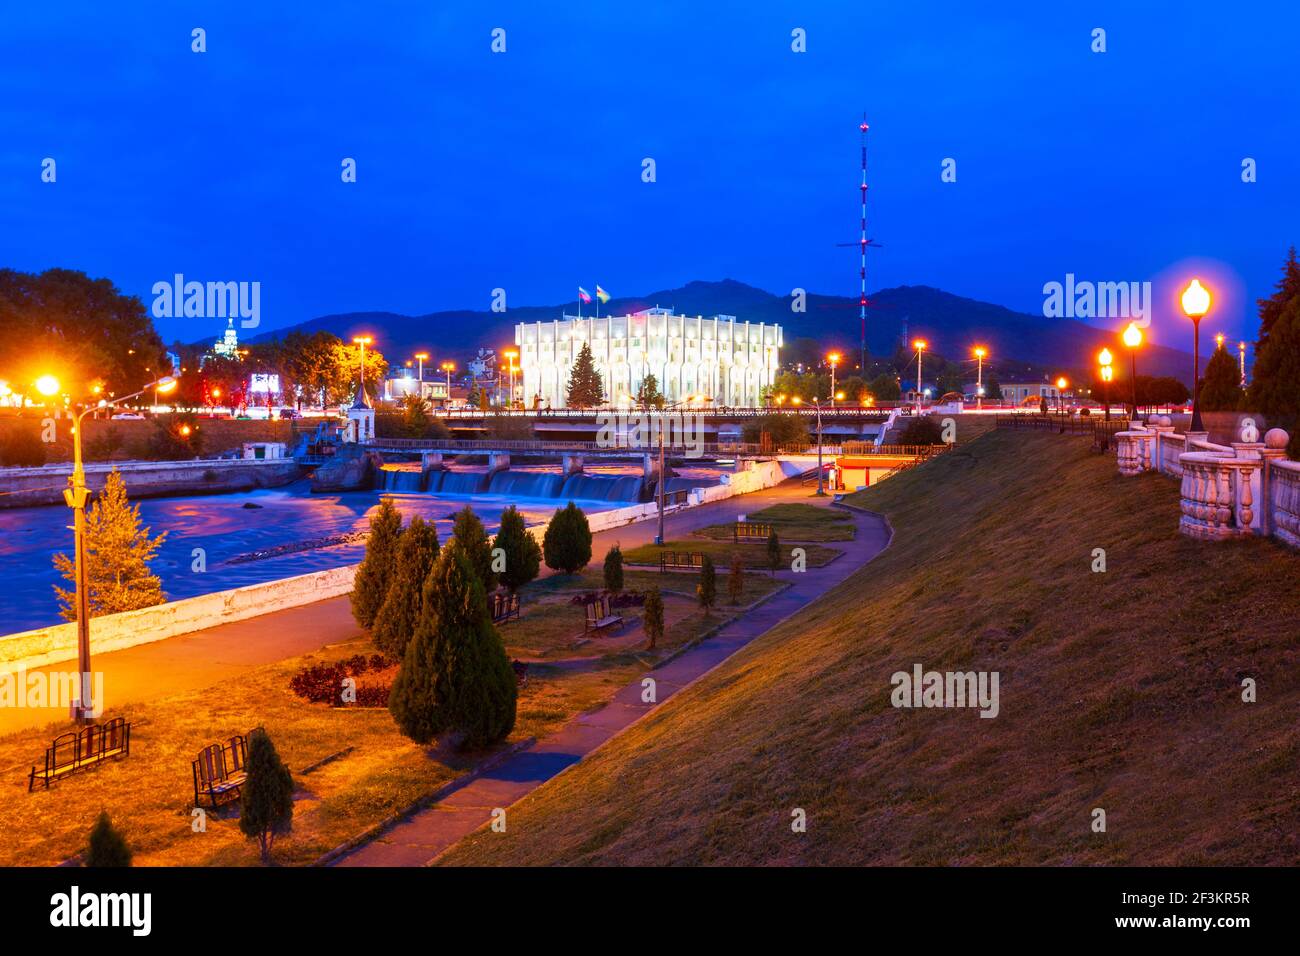 City administration building at the Terek river embankment in the centre of Vladikavkaz city, North Ossetia Alania, Russia at night Stock Photo